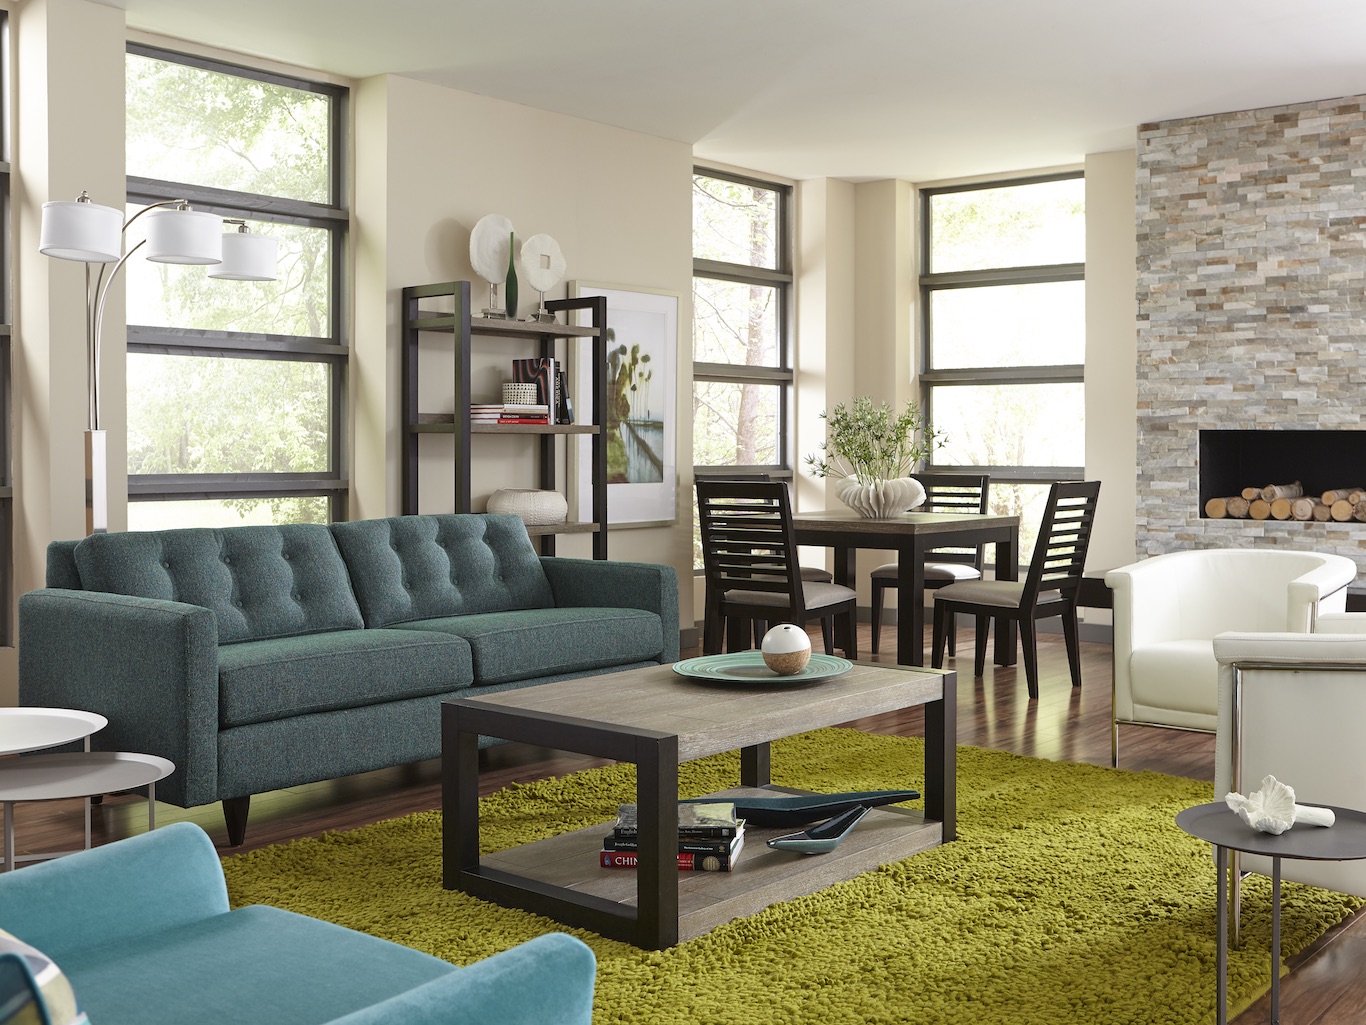 Living room with visible dining room, featuring a blue couch, green carpet, wooden coffee table